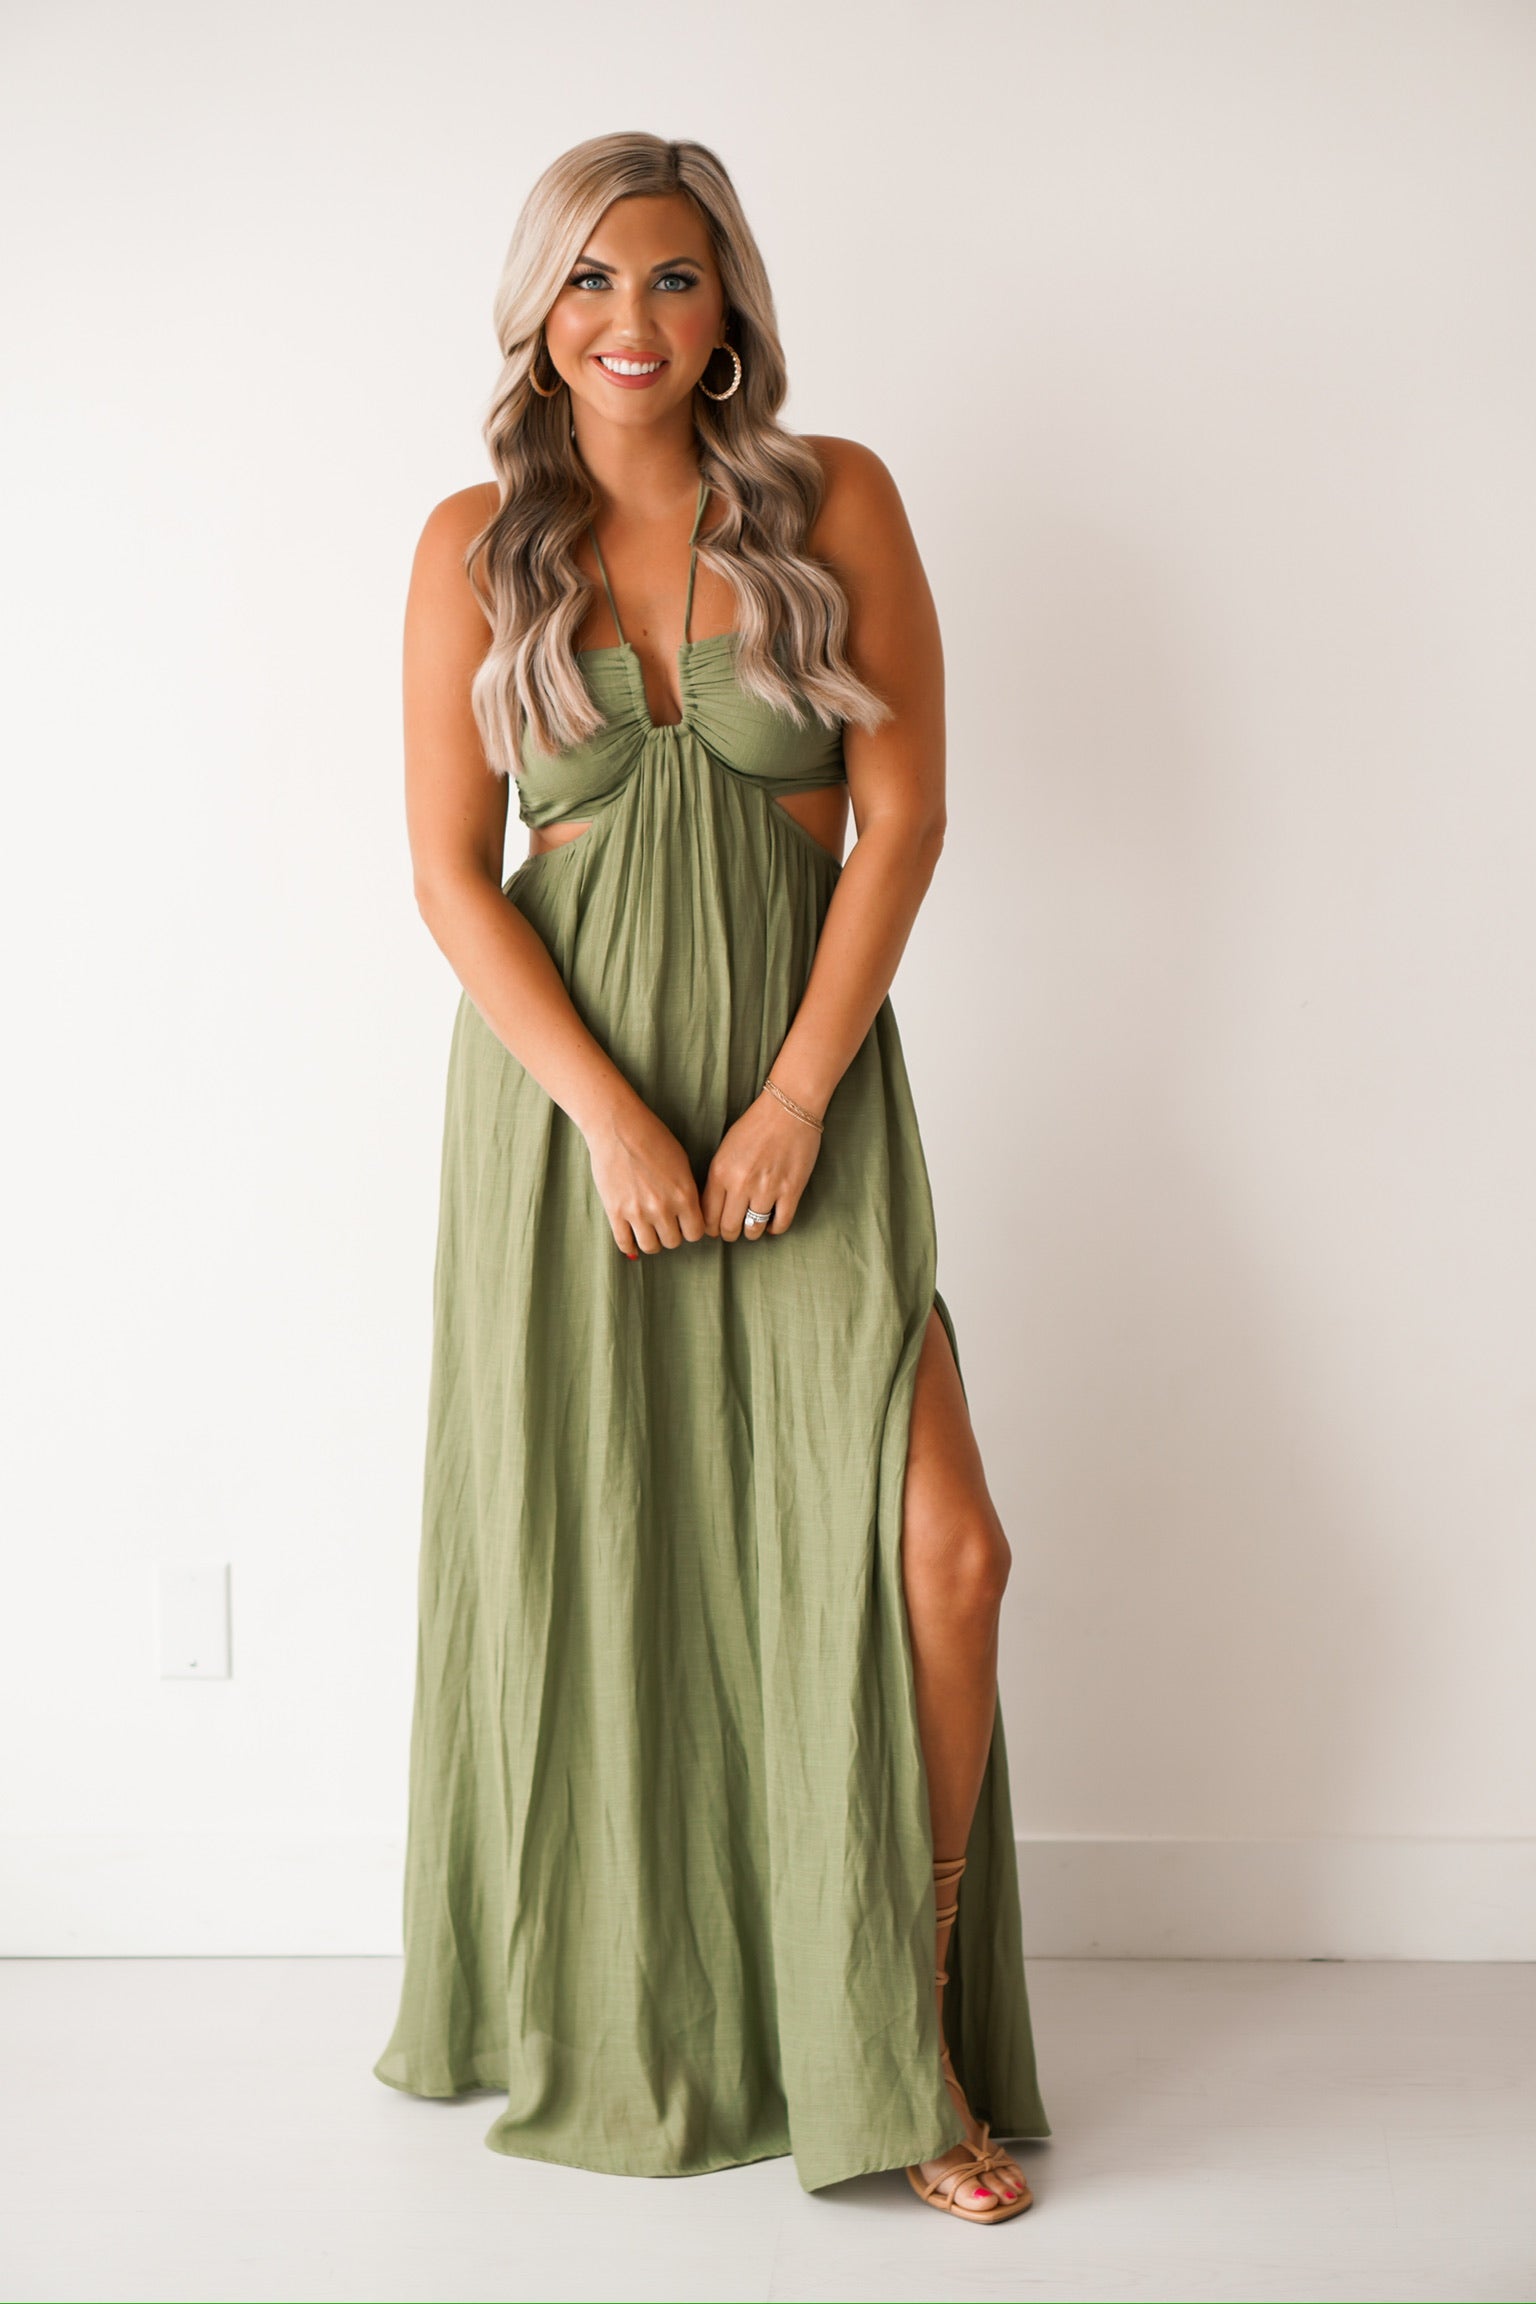 girl standing against a white wall wearing a long green dress that has cutouts on the side of the hips. SHe is wearing sandals